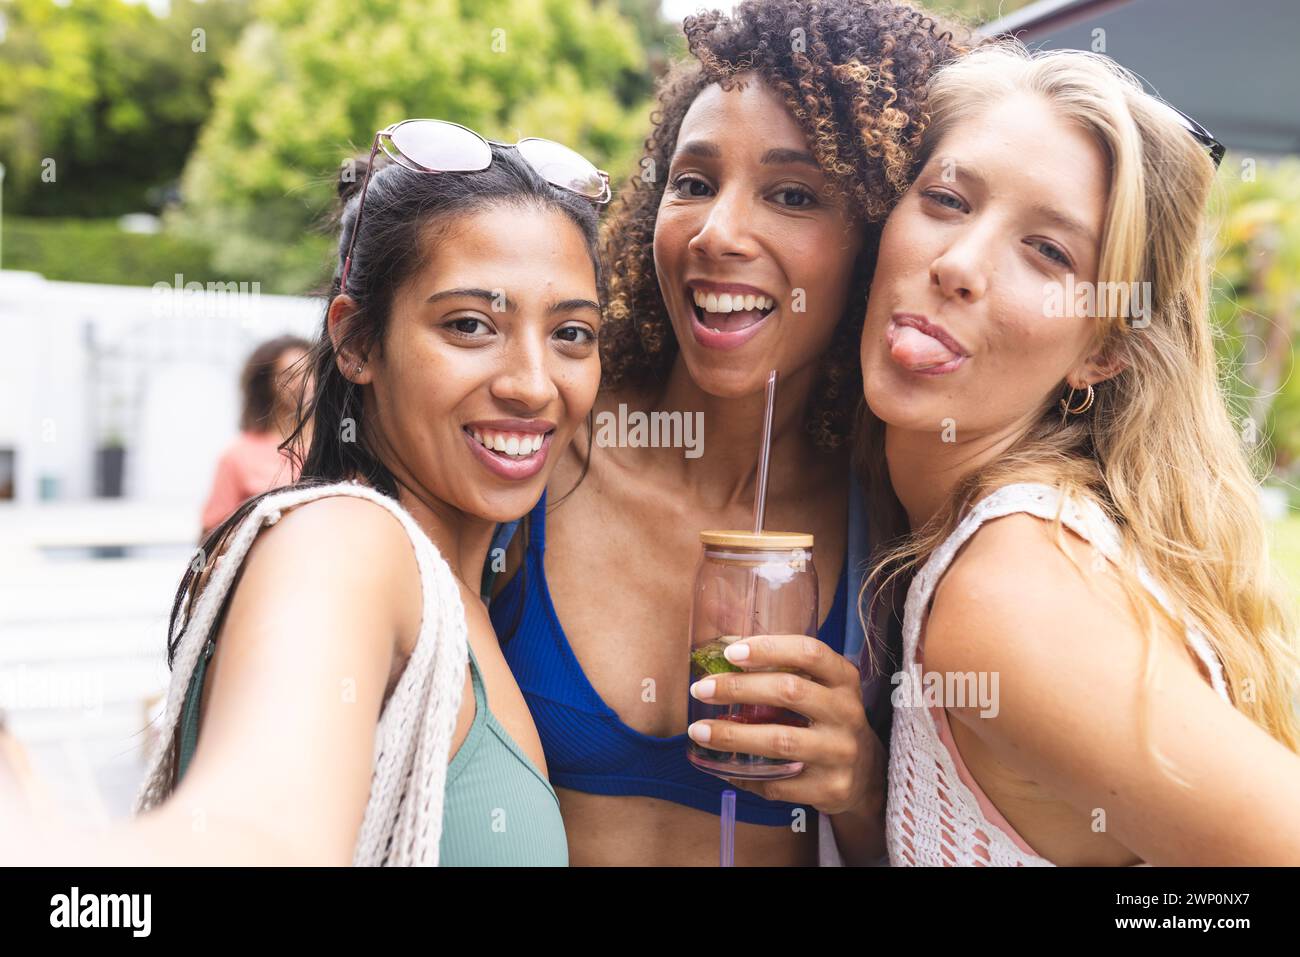 Three young women pose playfully, one sticking out her tongue Stock Photo